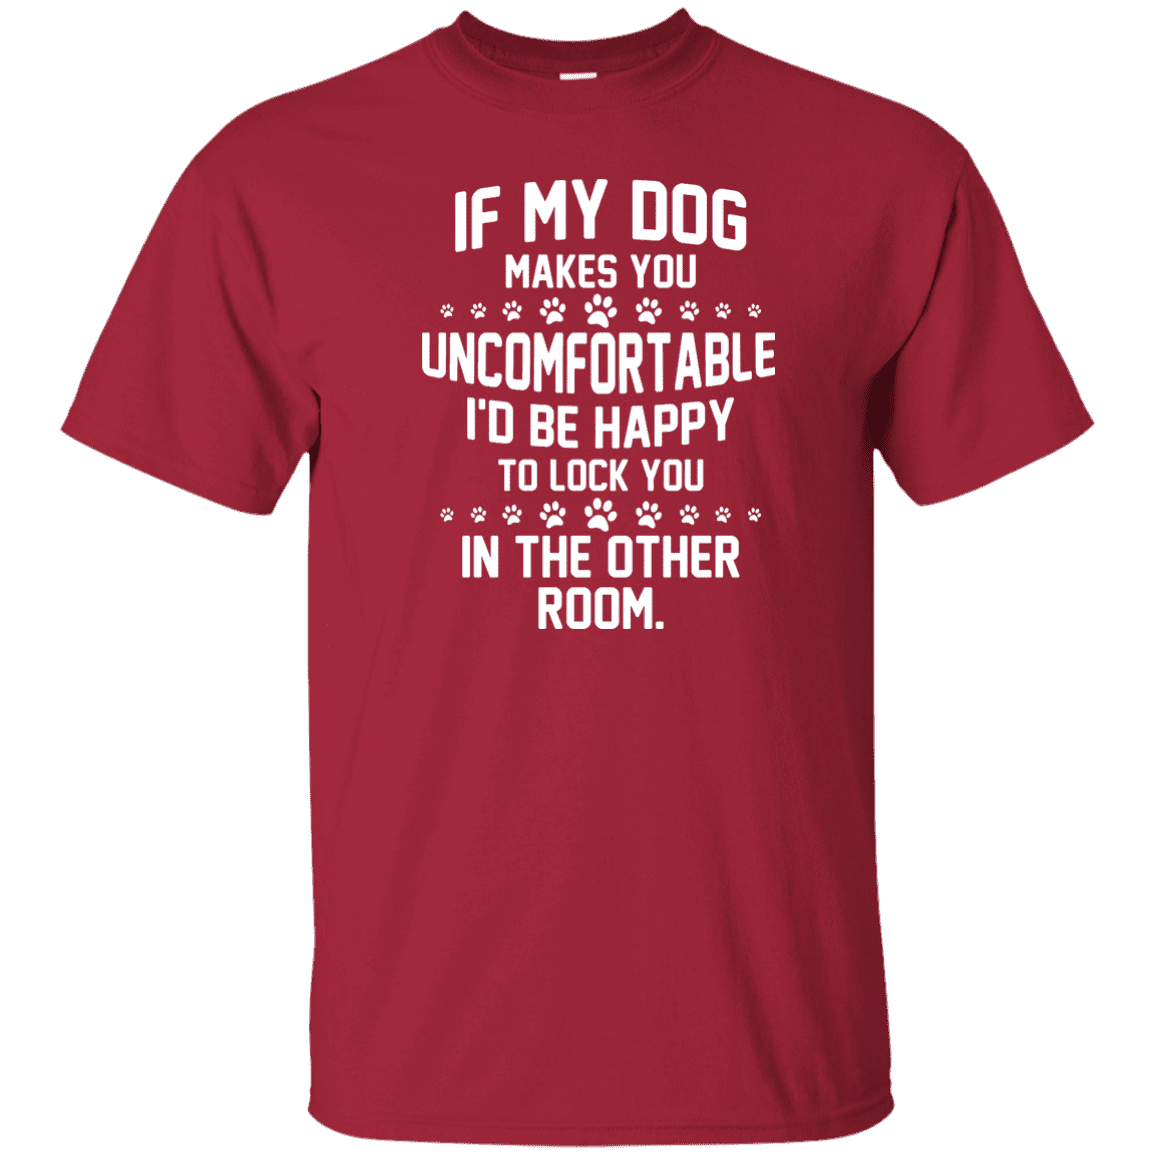 If My Dog Makes You Uncomfortable - T Shirt – Rescuers Club